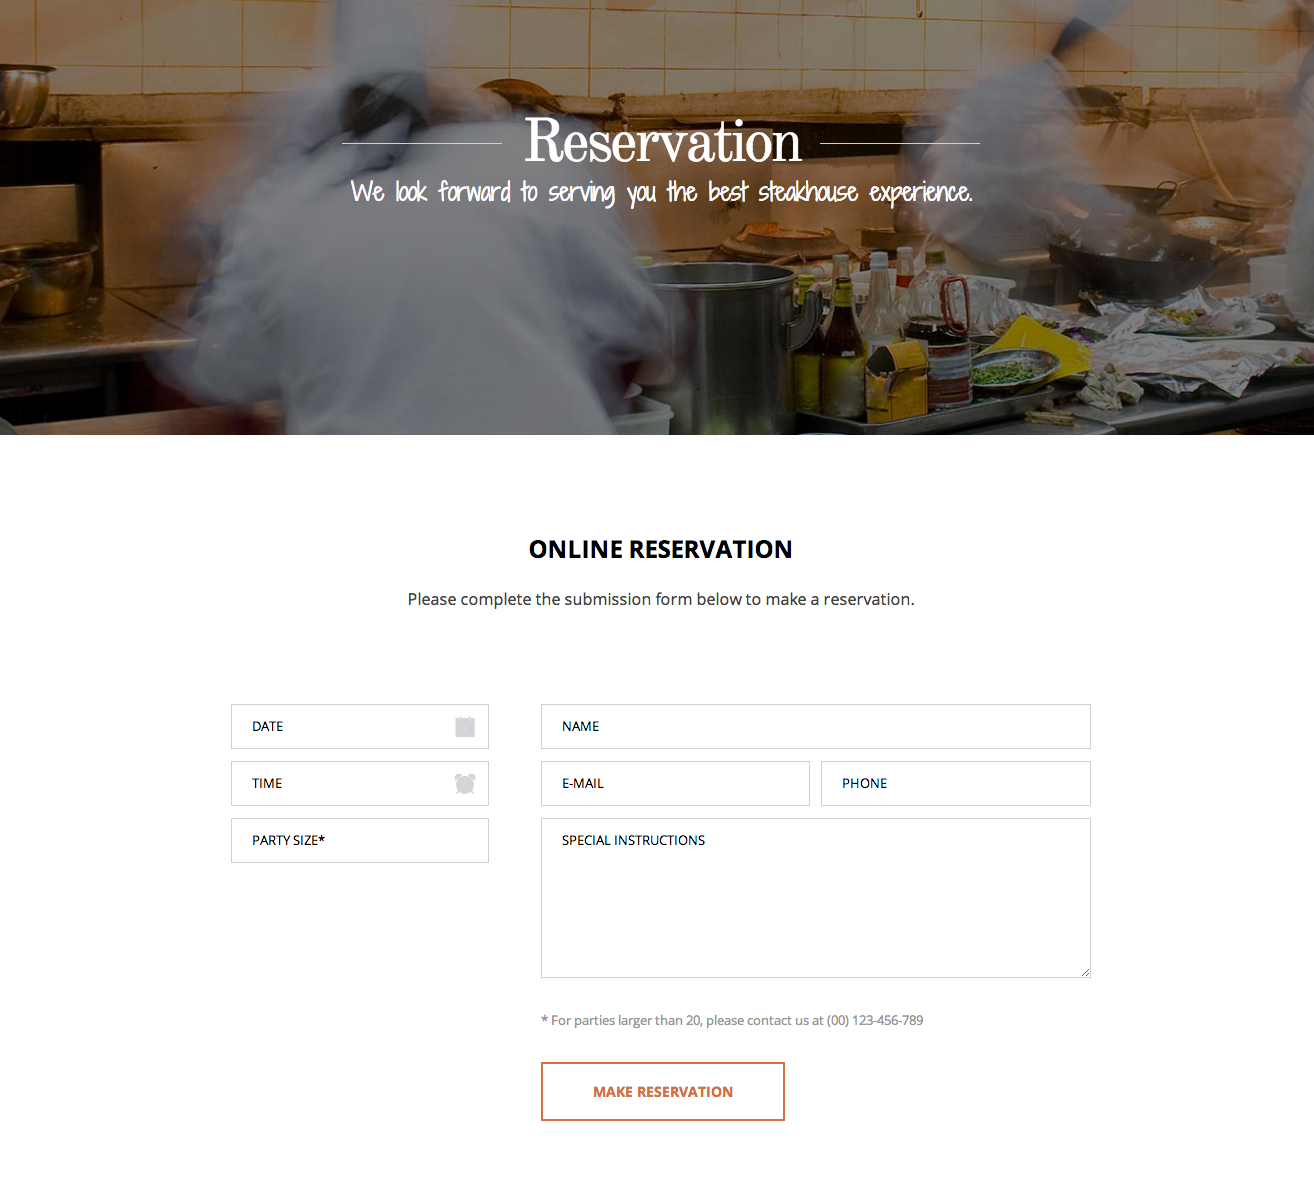 Reservation subpage